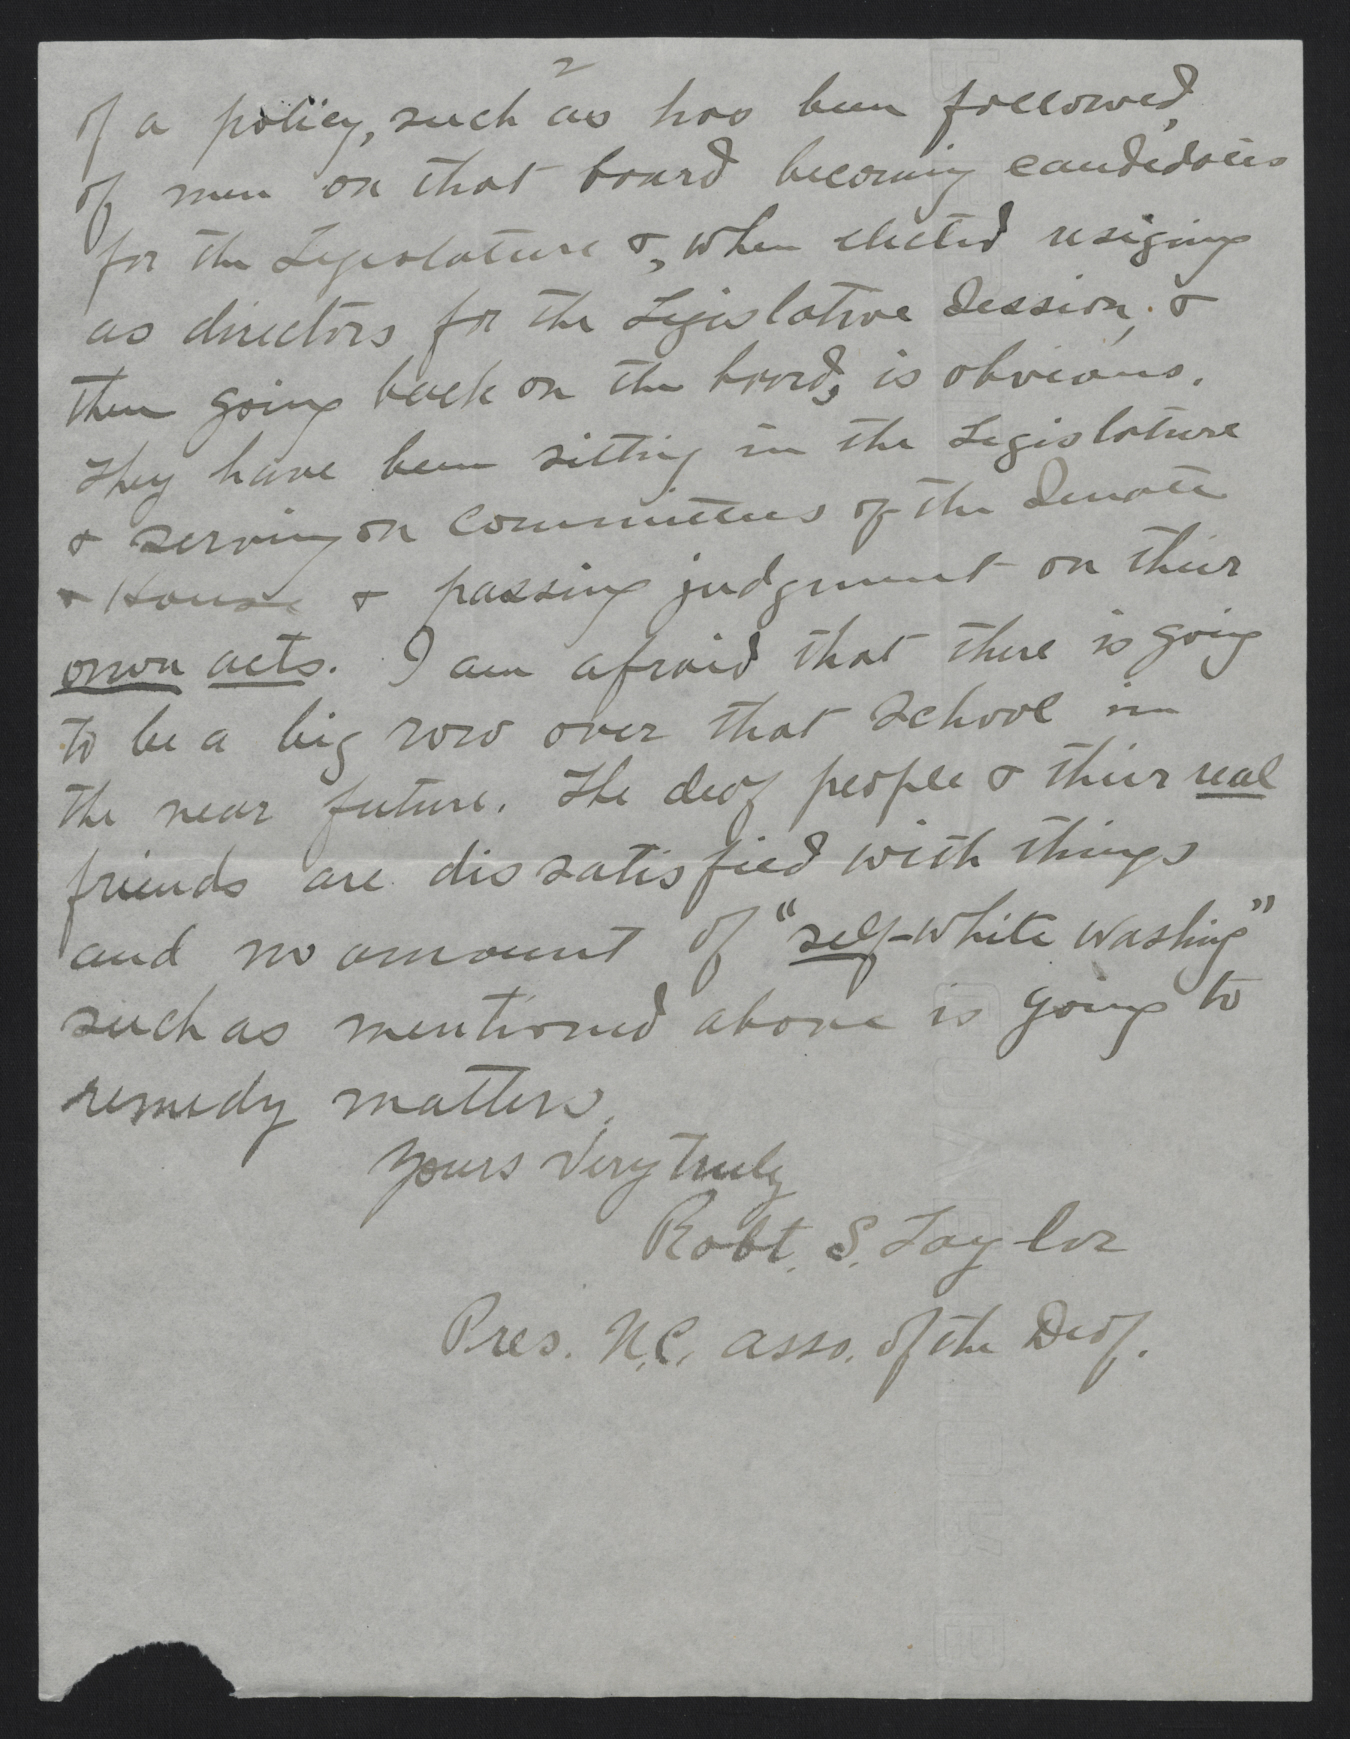 Letter from Taylor to Craig, August 2, 1913, page 2